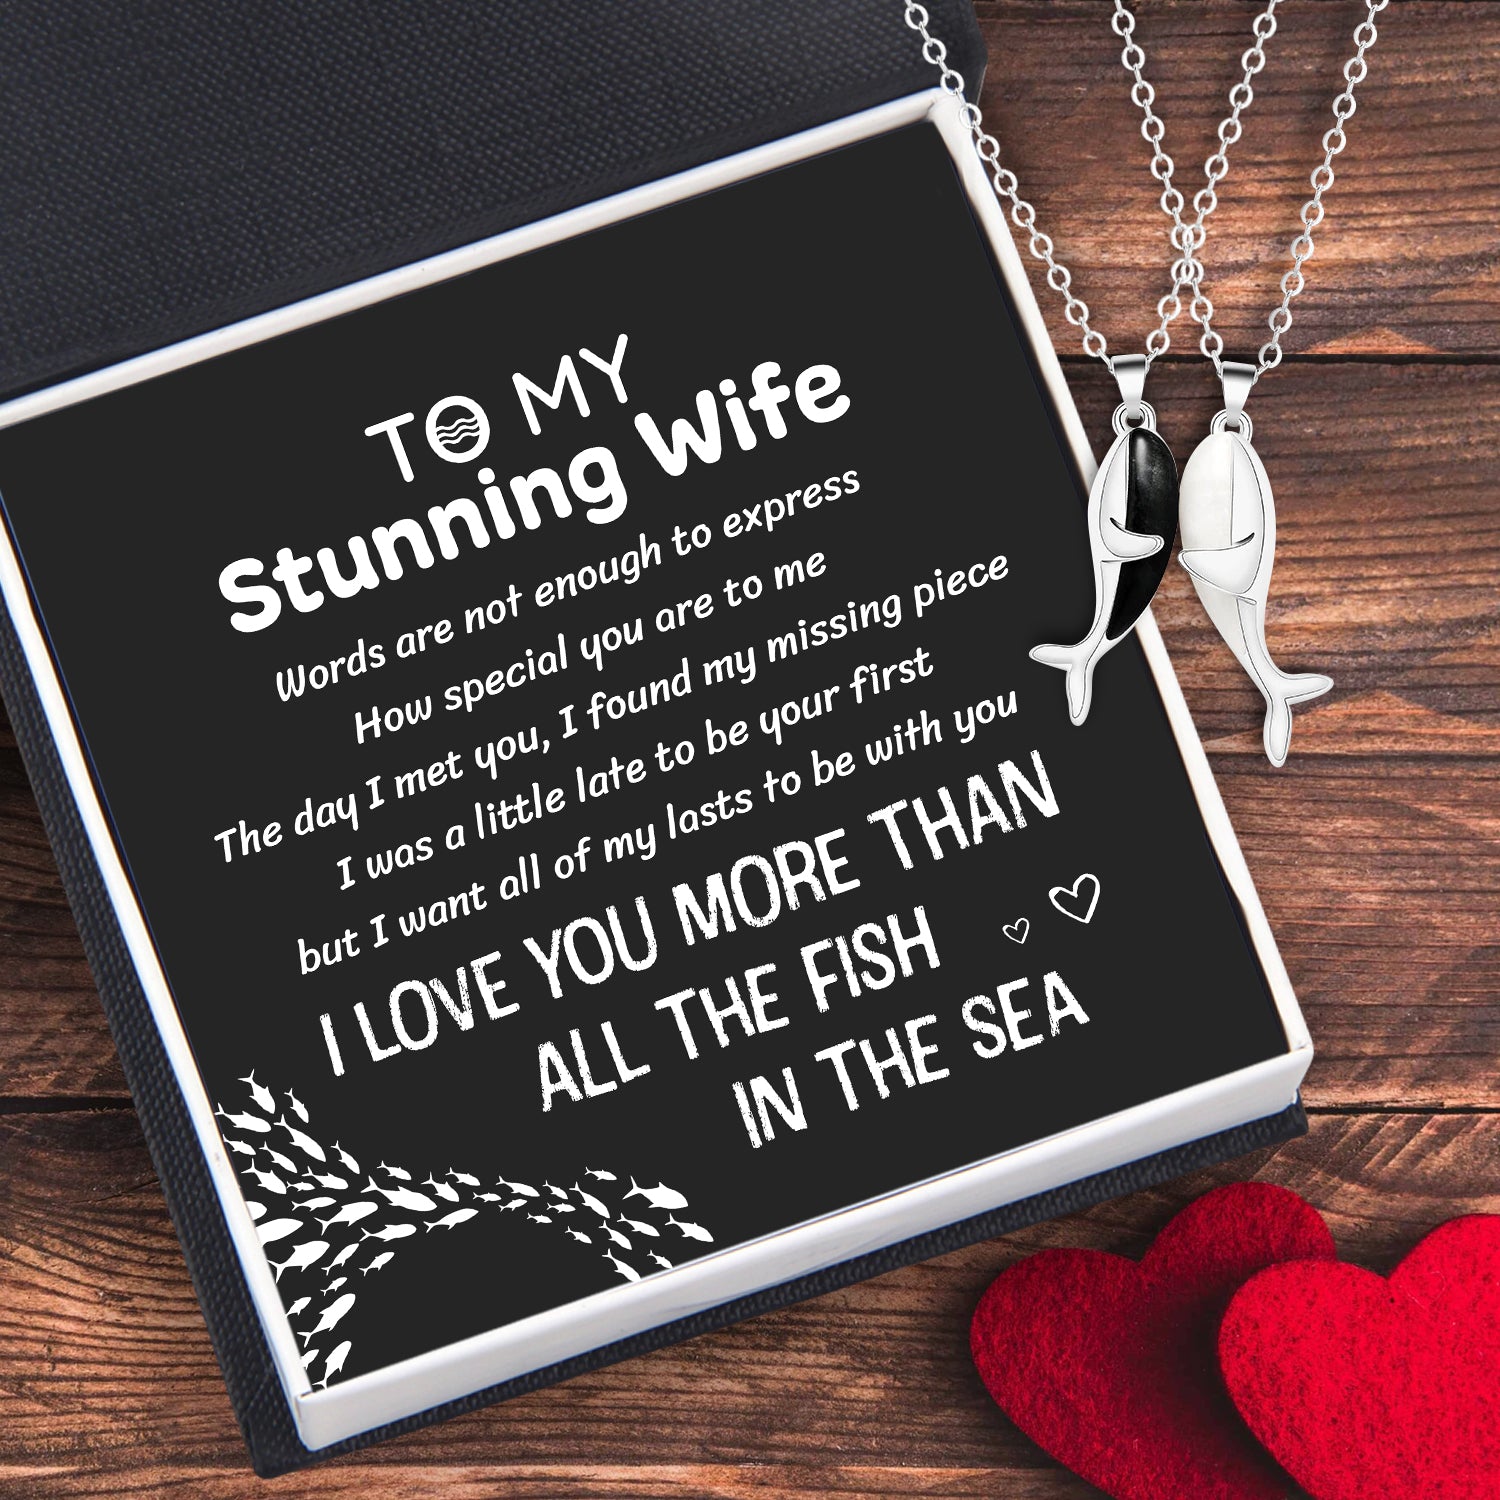 Whale Hug Couple Necklace - Fishing - To My Stunning Wife - I Love You More Than All The Fish In The Sea - Ukgngd15001